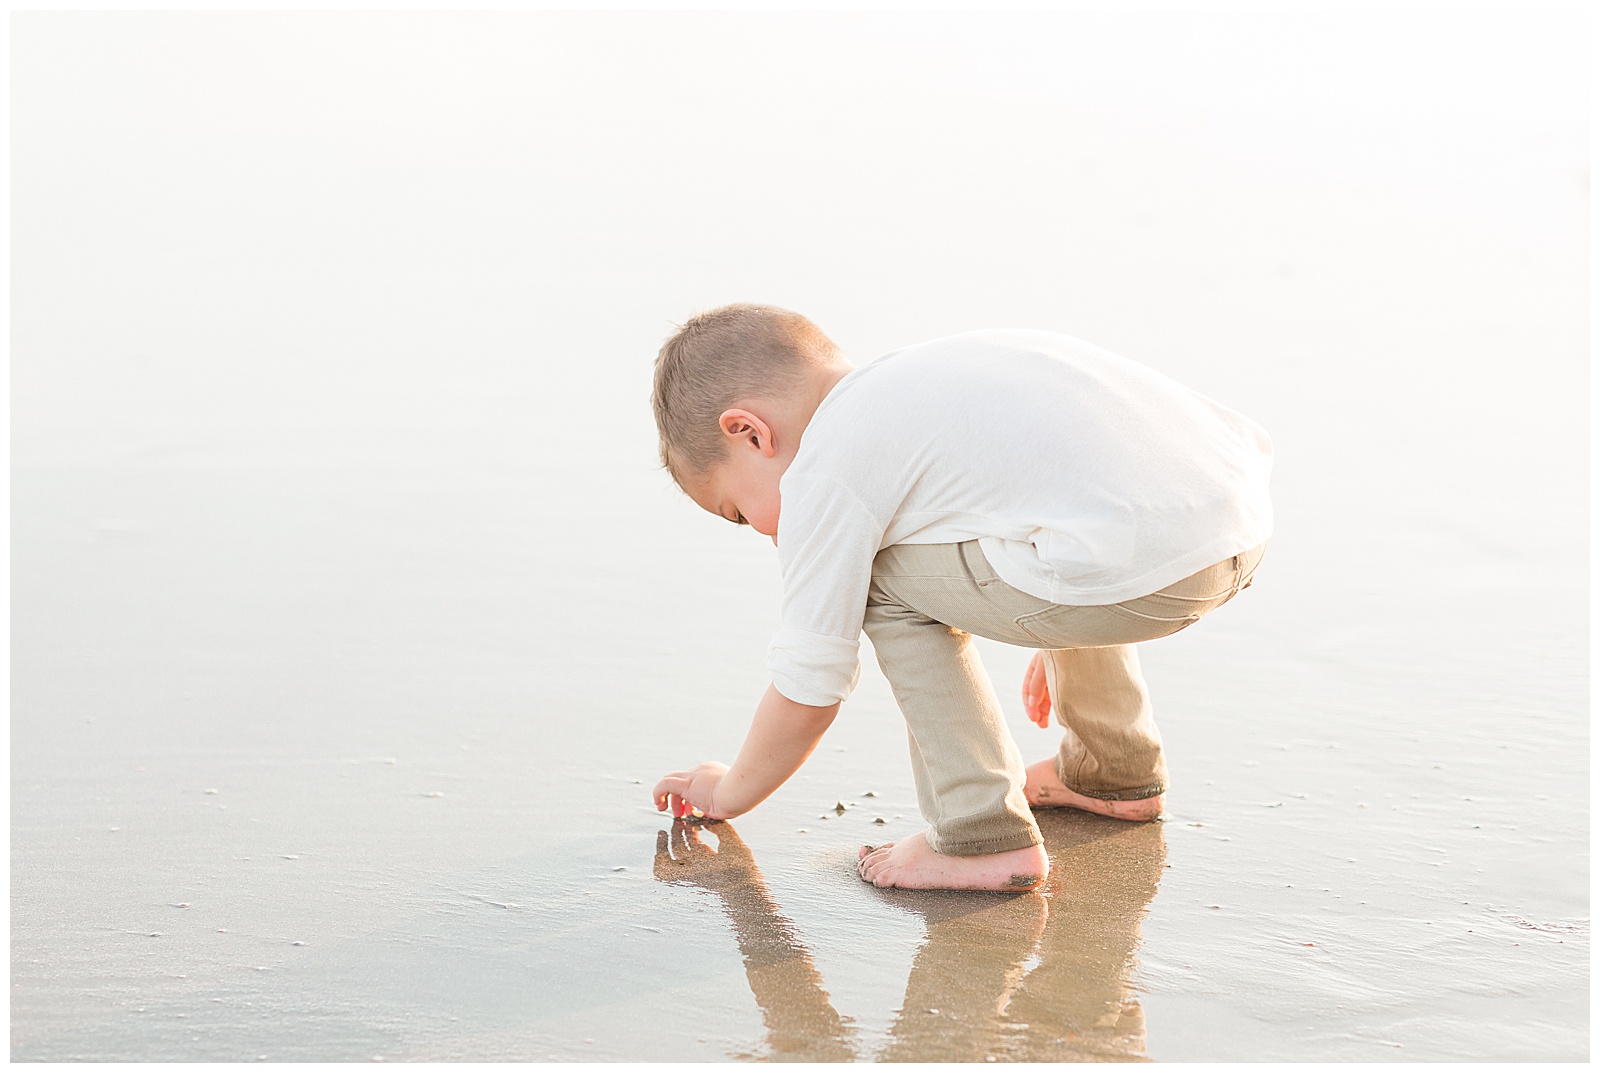 Family photographer, Rebecca Rice, captures toddler boy in his element on the beach picking up shells in the sand along the shoreline.